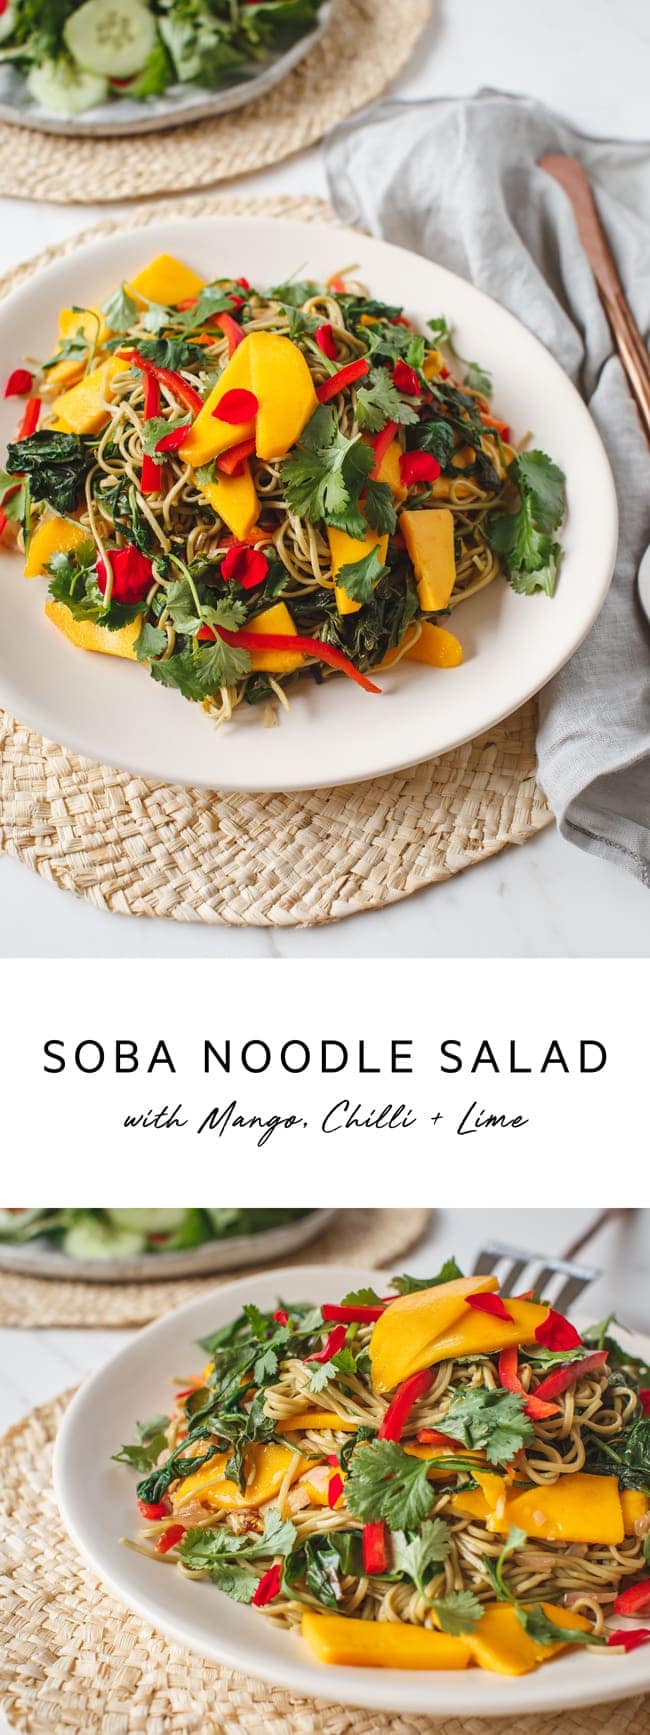 Mango Soda Noodle Salad packed with gently cooked greens and finished with a tangy chilli and lime dressing. #mangosalad #sobanoodles #sobasalad #chillilime #quickdinner #healthydinnerideas #healthymains #vegandinner #veganrecipes #AscensionKitchen 